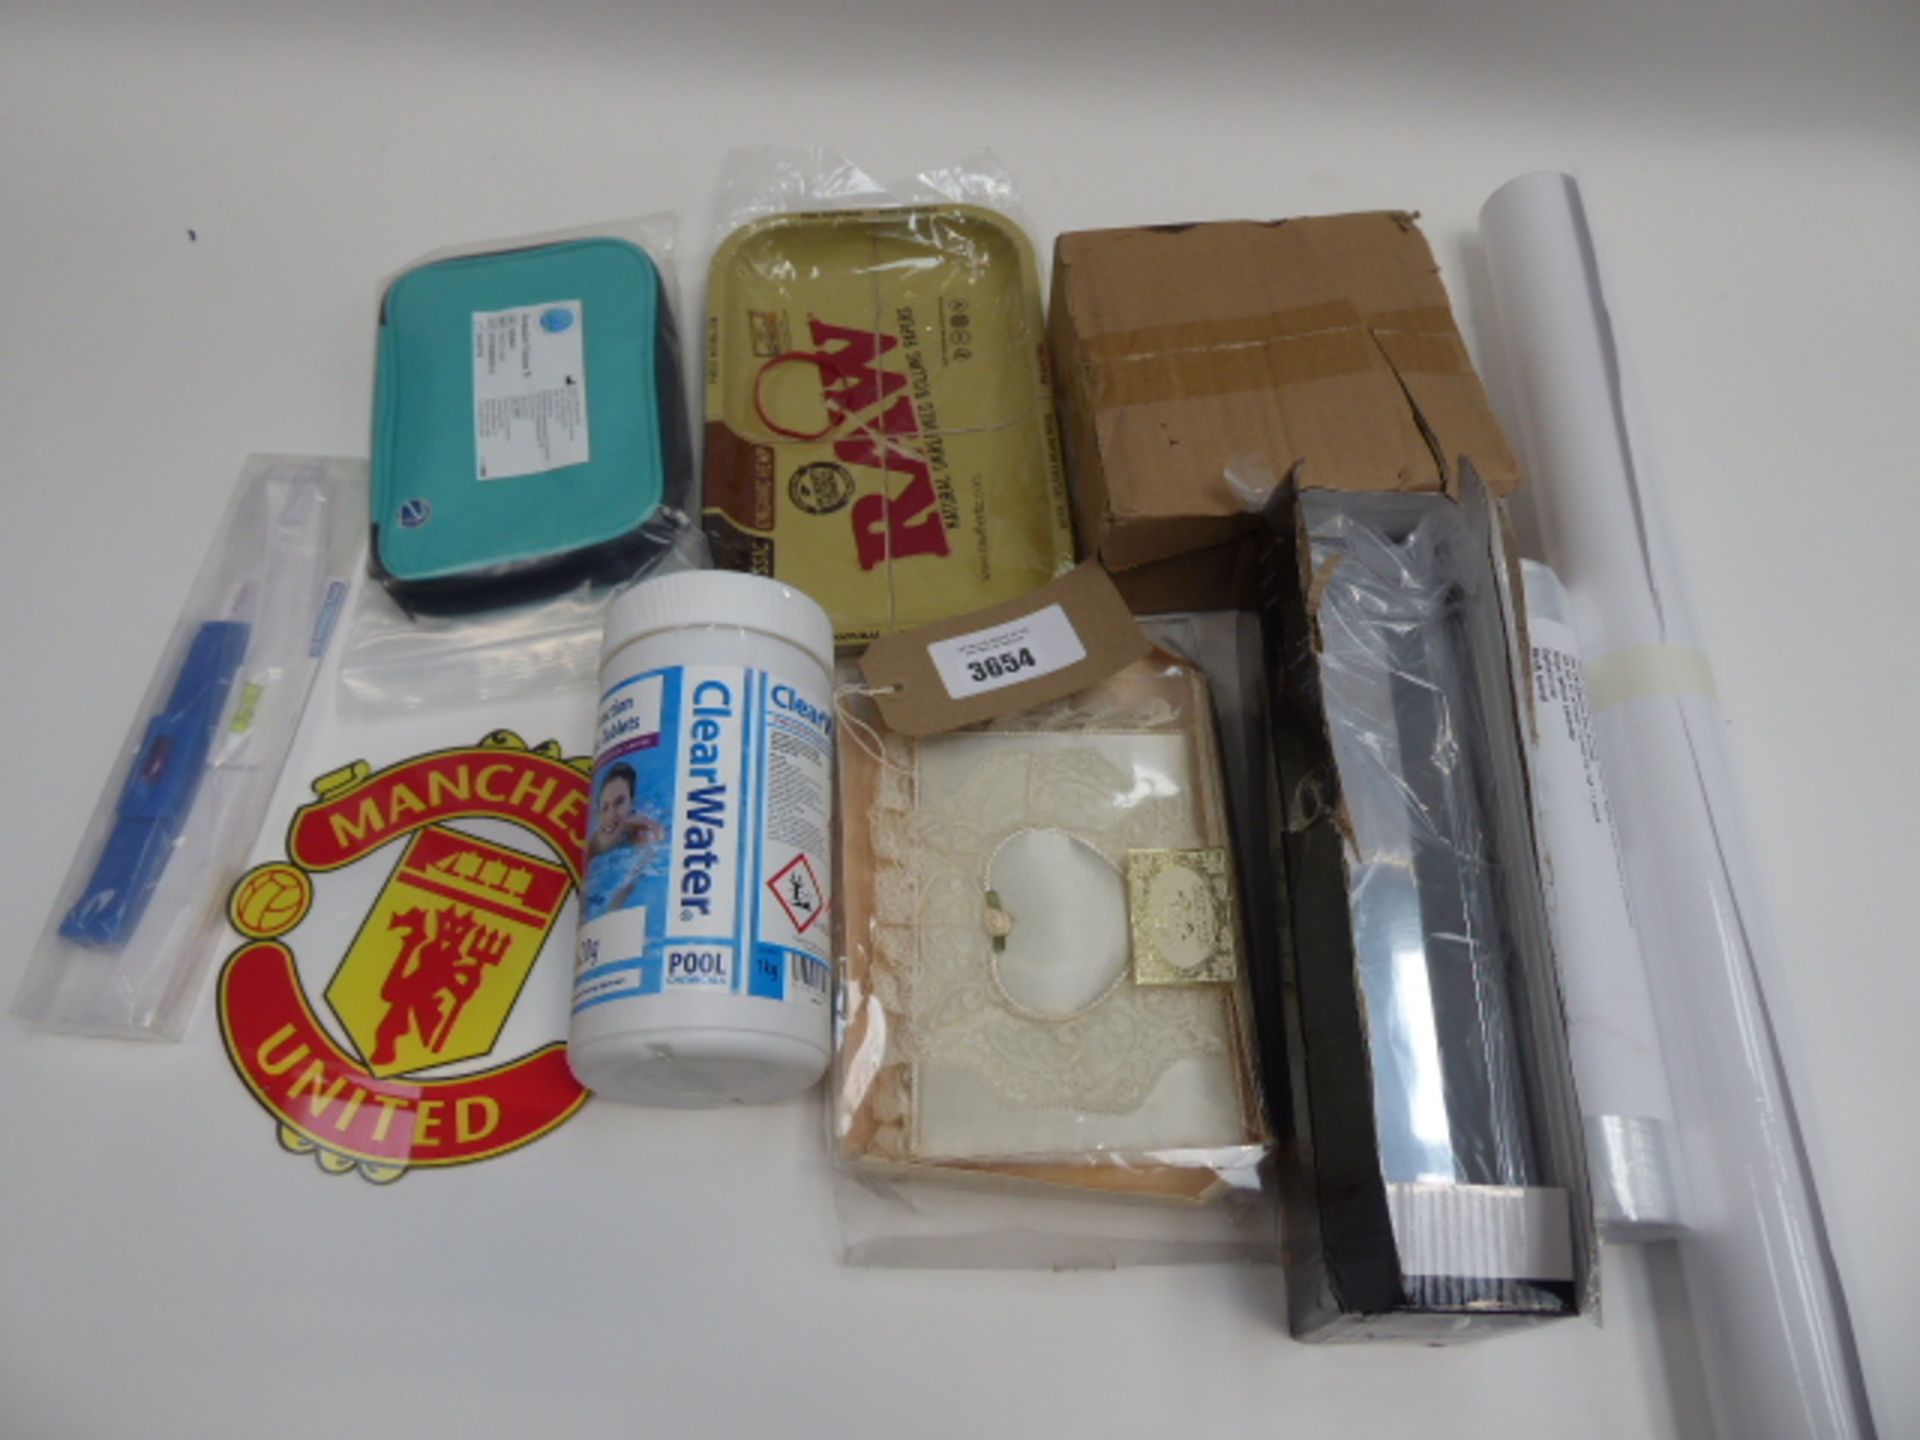 Bag containing RAW rolling tray, Manchester United sign, letter box, ClearWater pool cleaner,